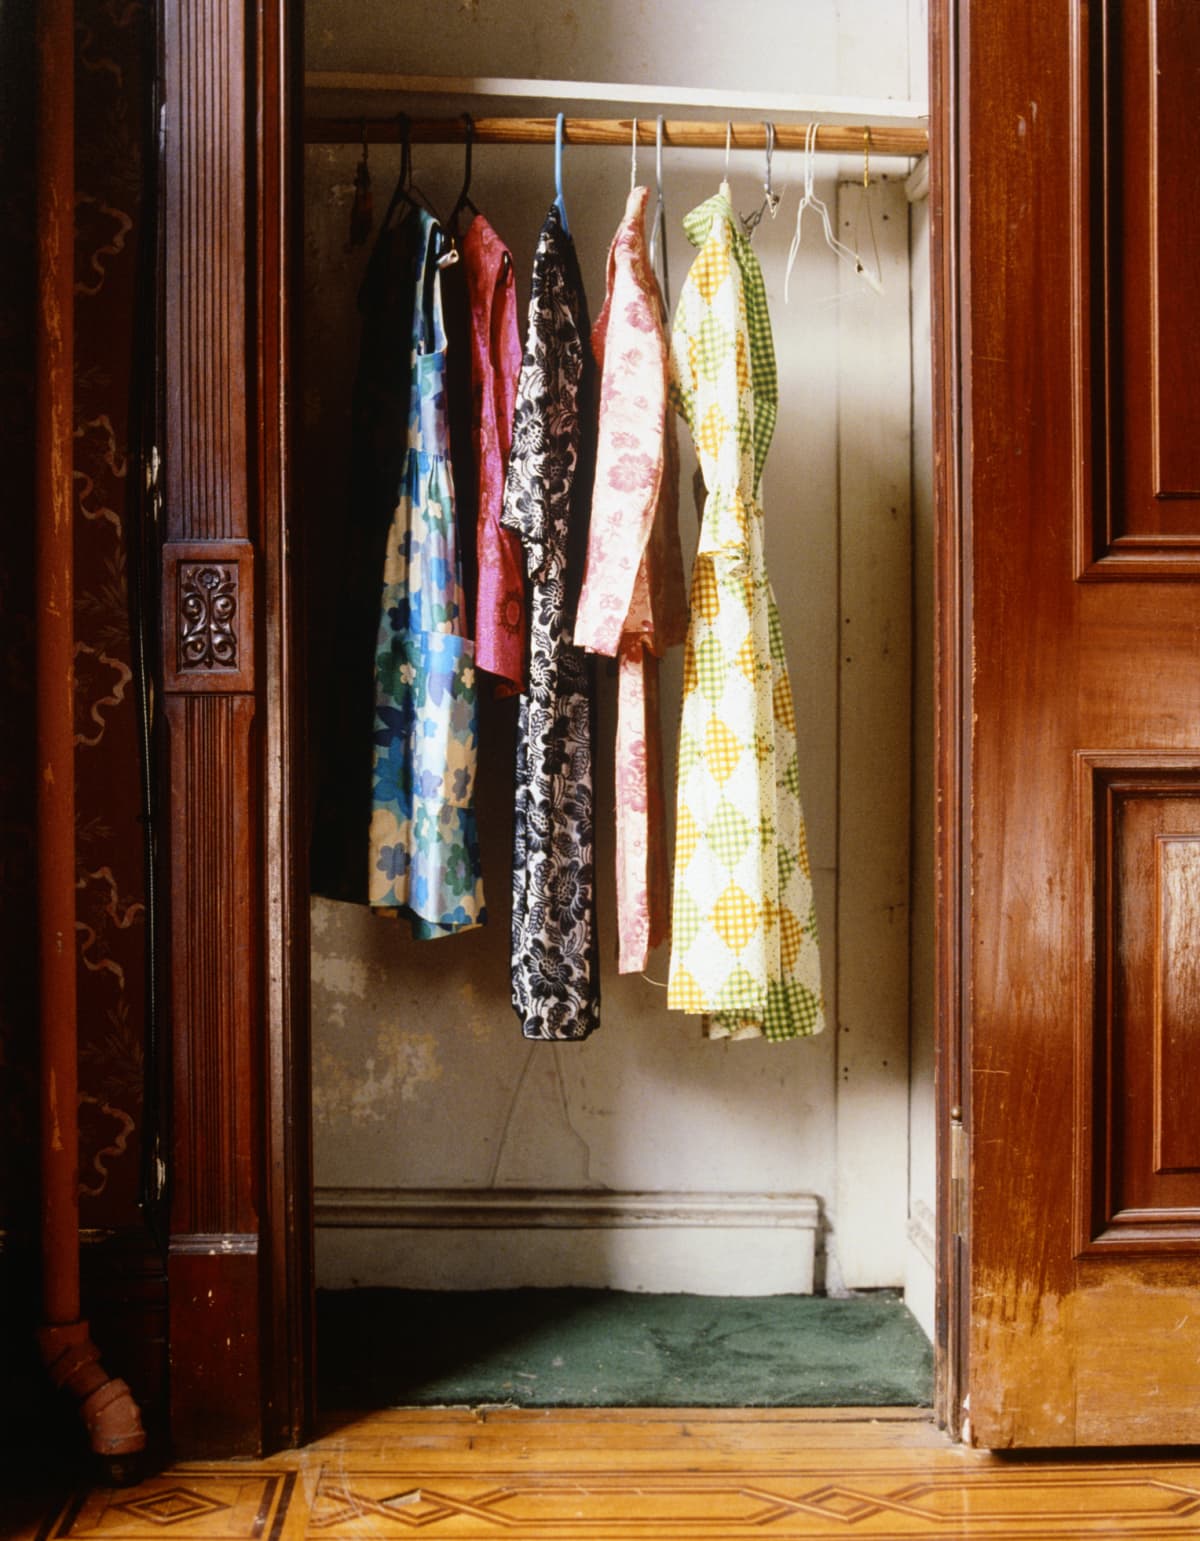 Women's clothes hanging in an old-fashioned wooden closet